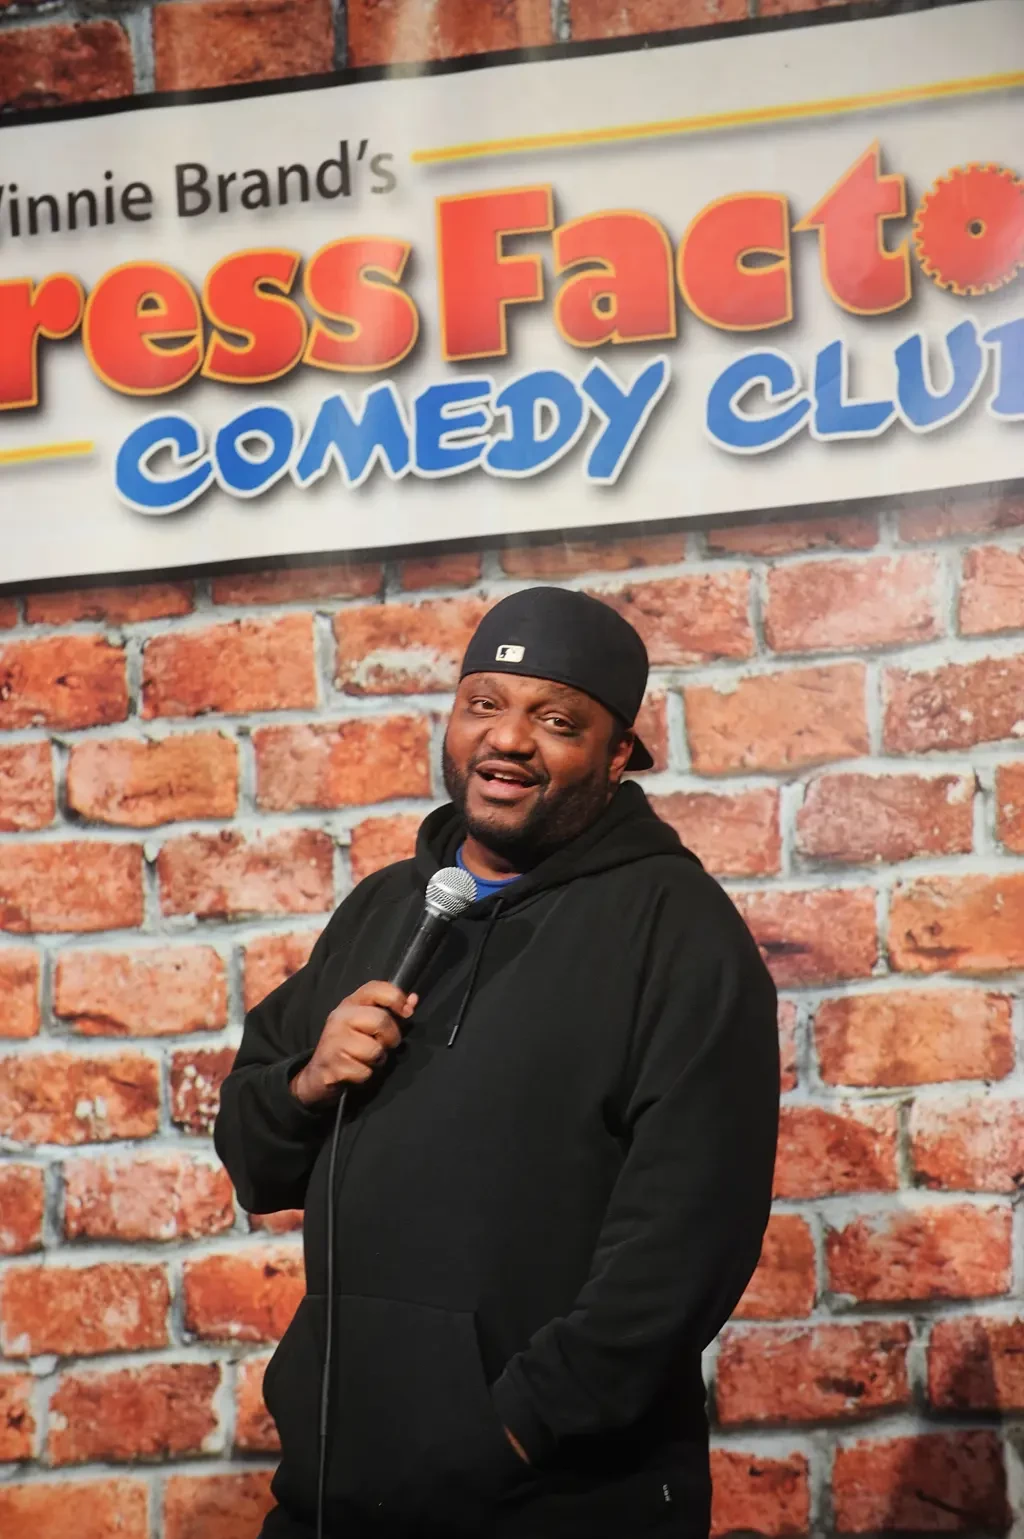  Comedians Tiffany Haddish and Aries Spears accused of grooming, child molestation